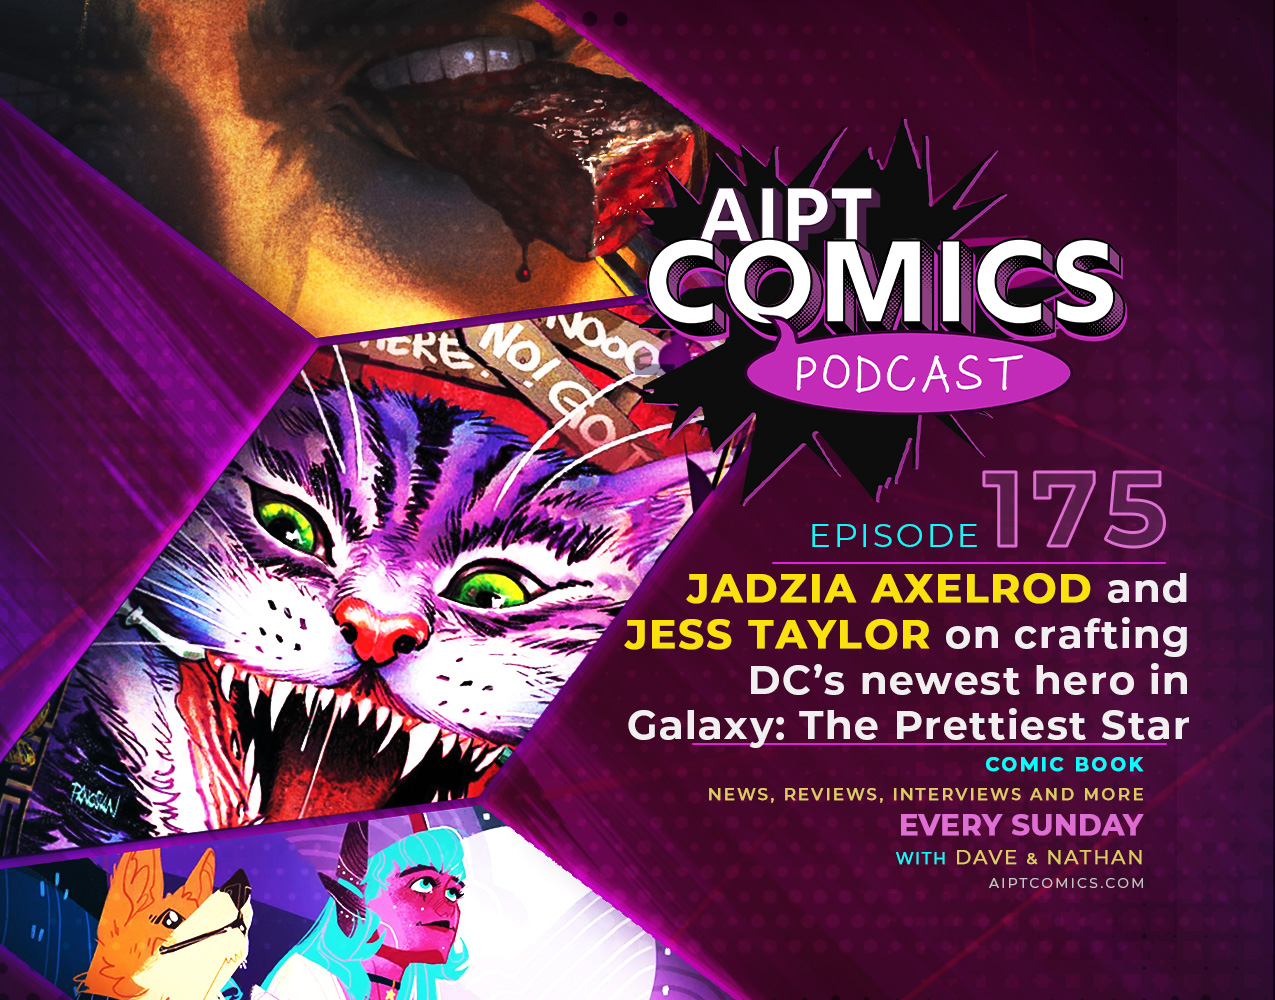 AIPT Comics podcast episode 175: Jadzia Axelrod and Jess Taylor on crafting DC’s newest hero in 'Galaxy: The Prettiest Little Star'